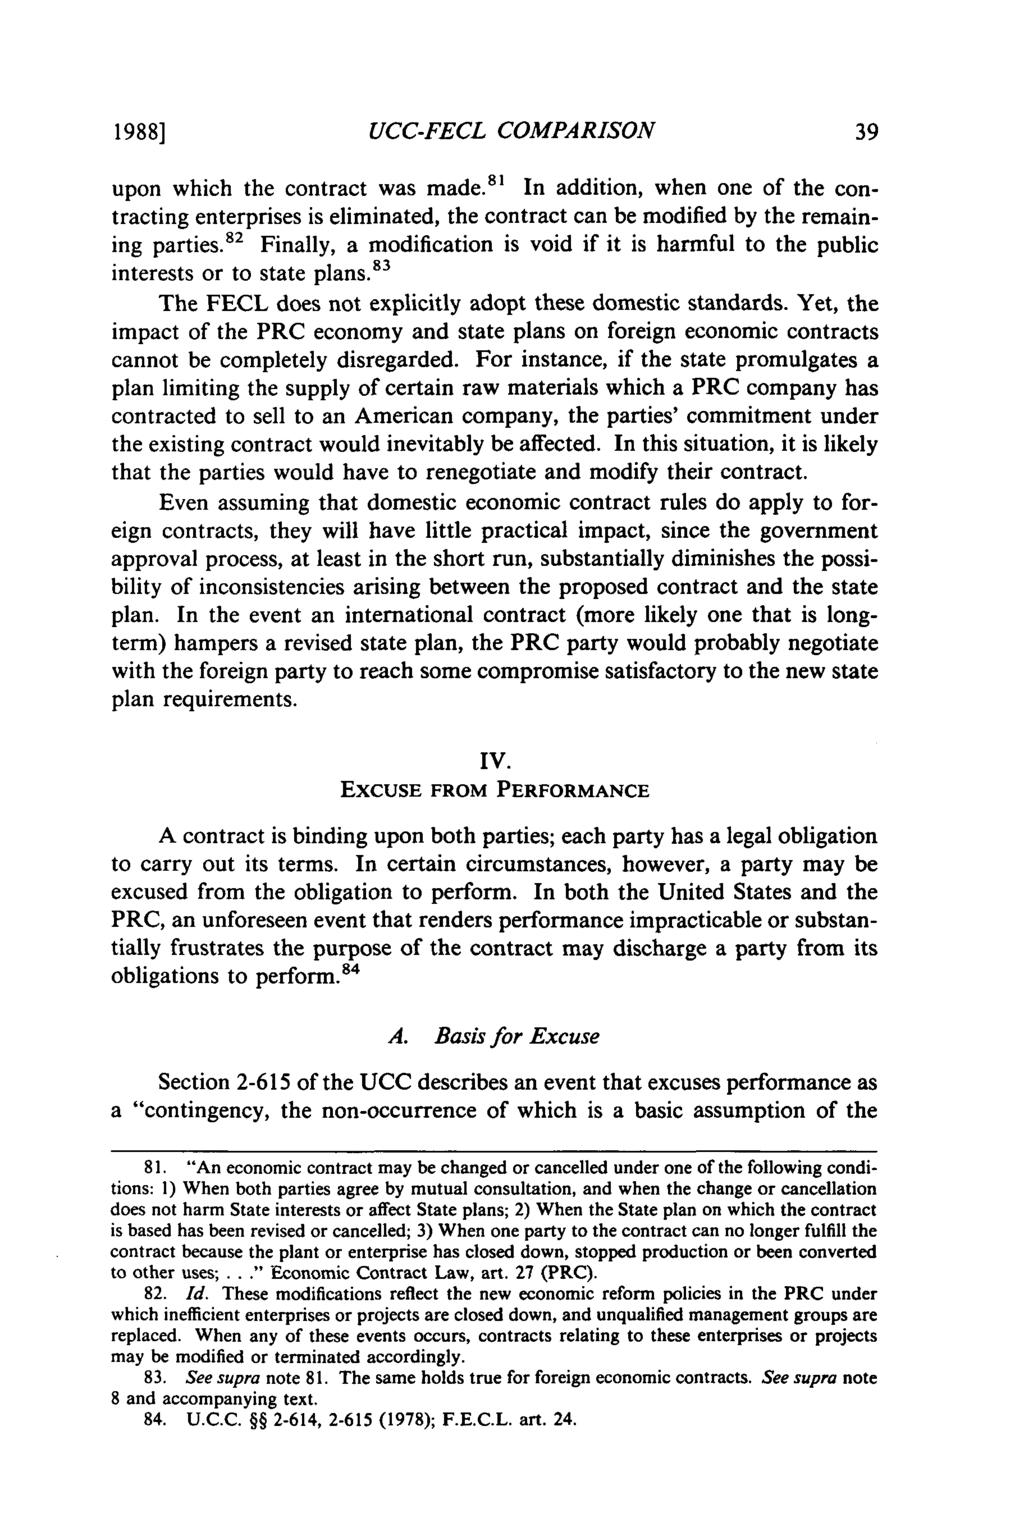 1988] UCC-FECL COMPARISON upon which the contract was made. 8 1 In addition, when one of the contracting enterprises is eliminated, the contract can be modified by the remaining parties.